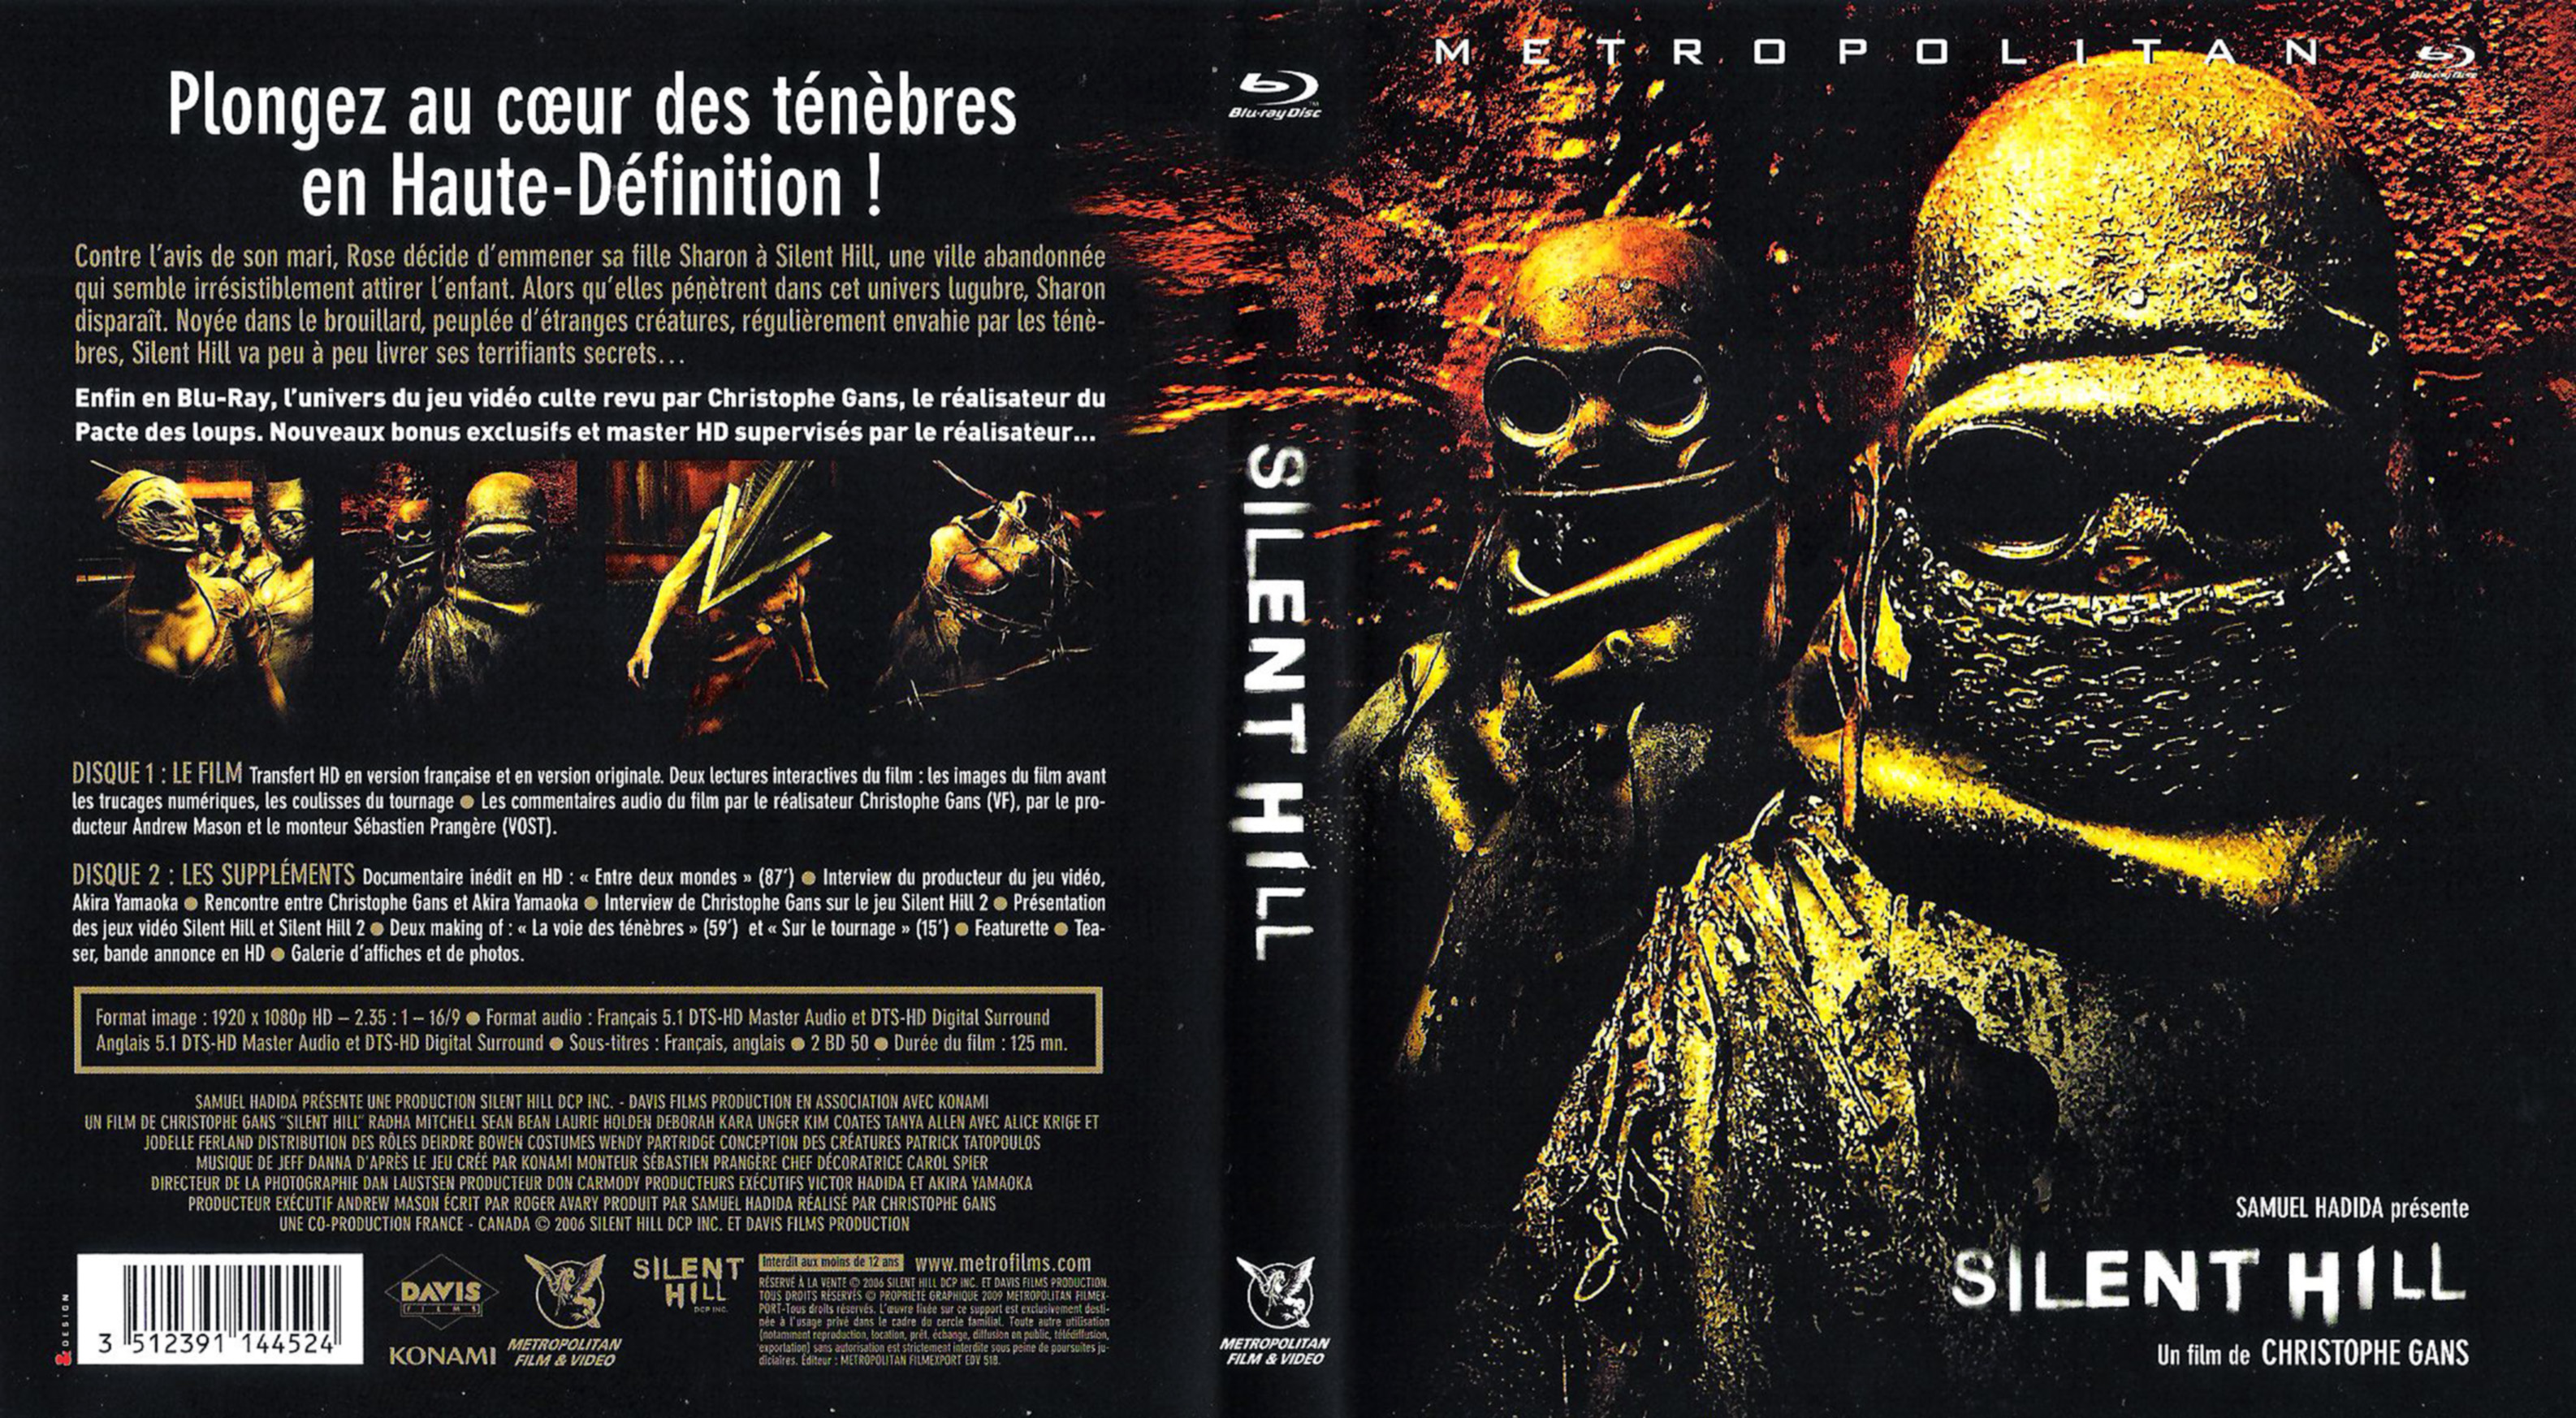 Jaquette DVD Silent Hill (BLU-RAY) v3